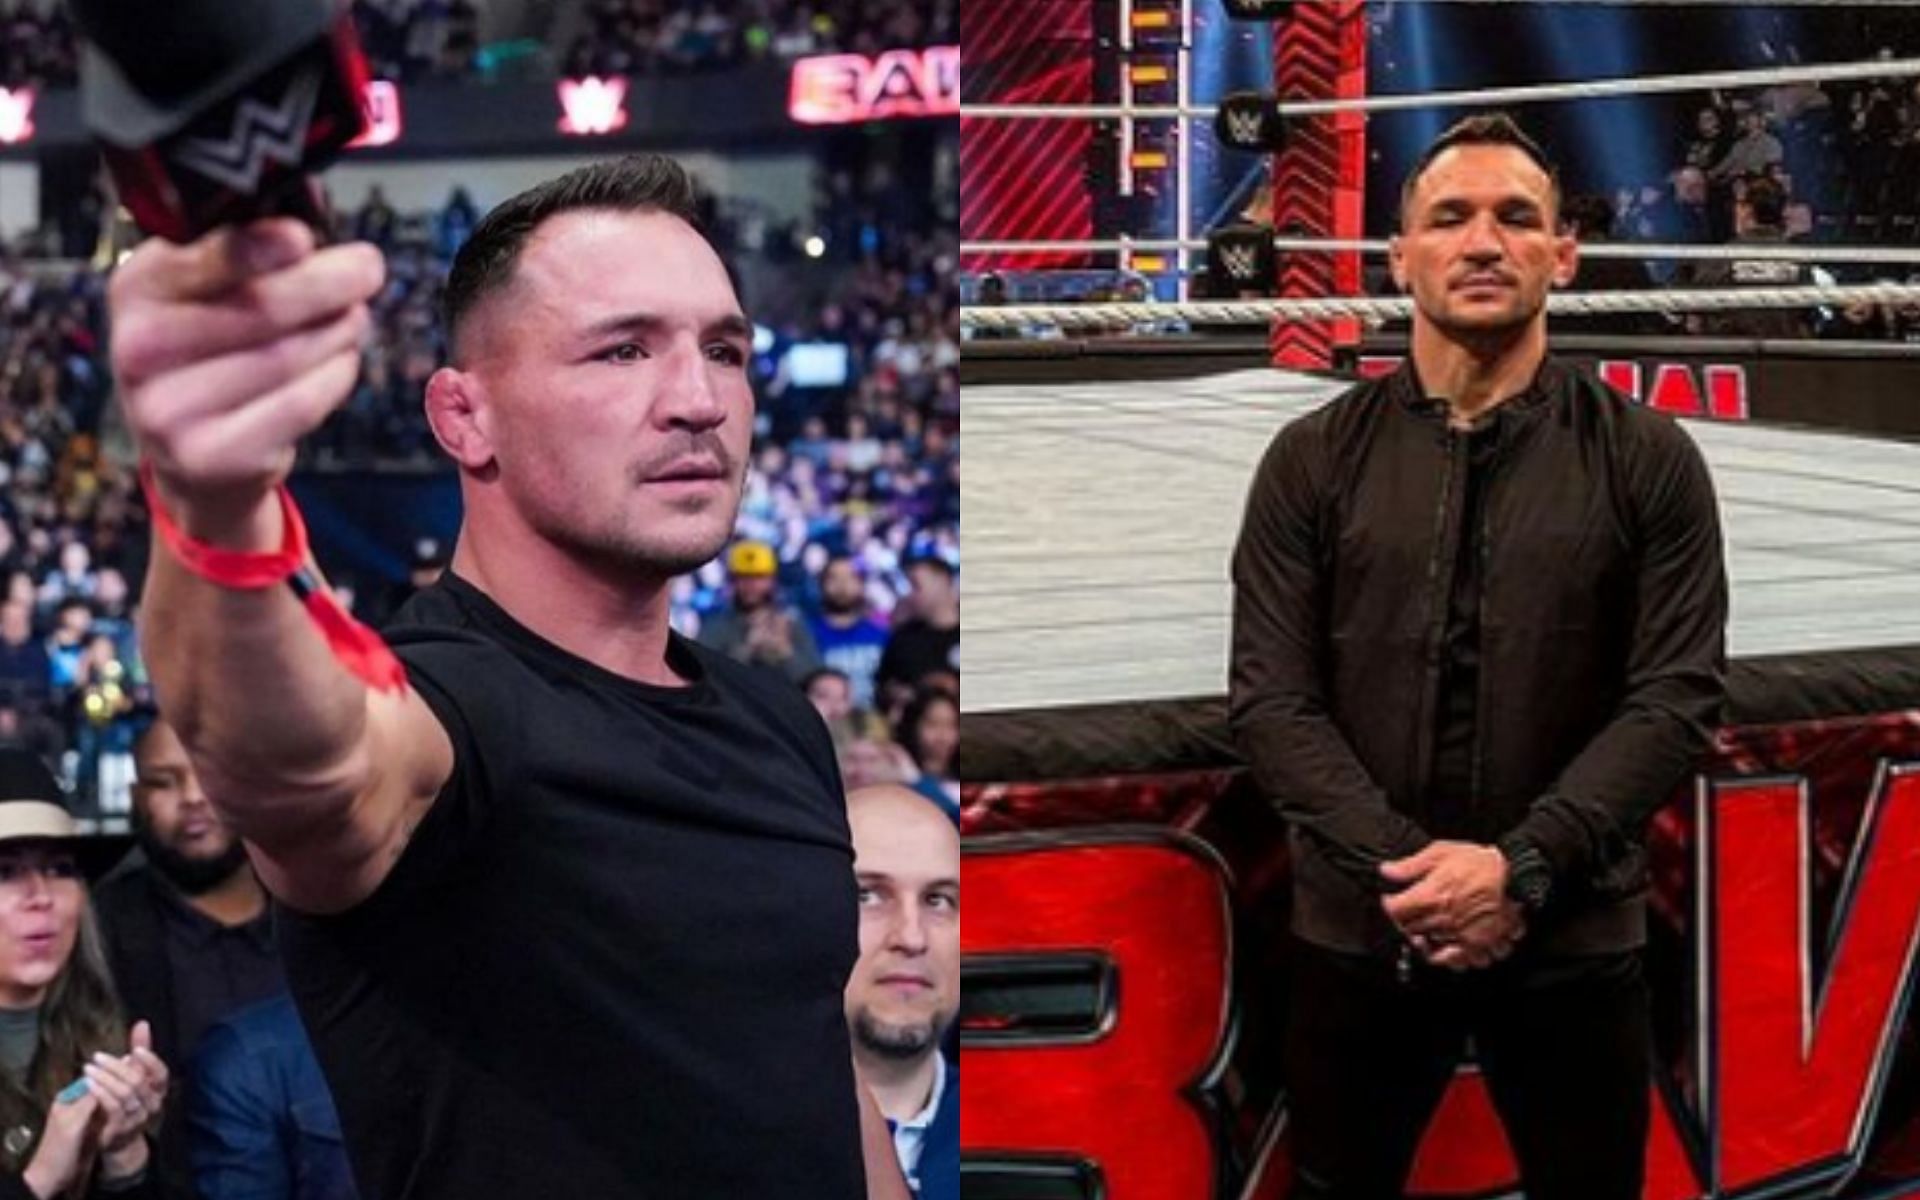 Michael Chandler discusses potential &quot;crossover&quot; between WWE and UFC athletes post TKO merger [Image courtesy: @mikechandlermma - Instagram]